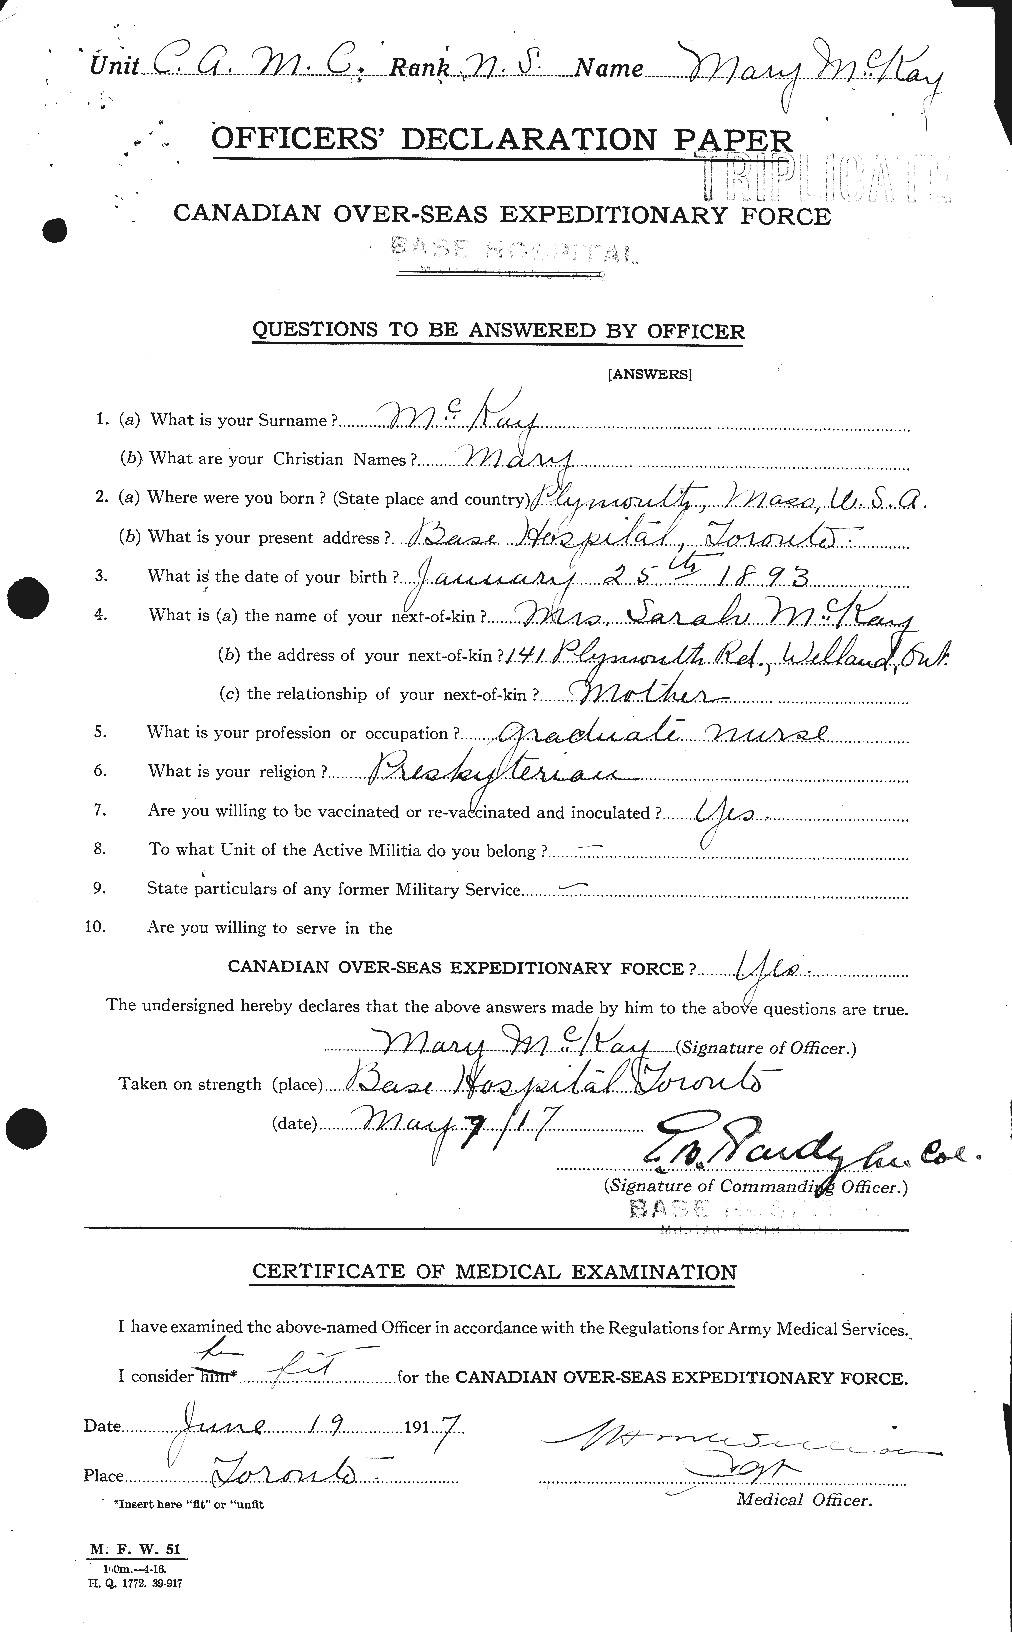 Personnel Records of the First World War - CEF 527173a